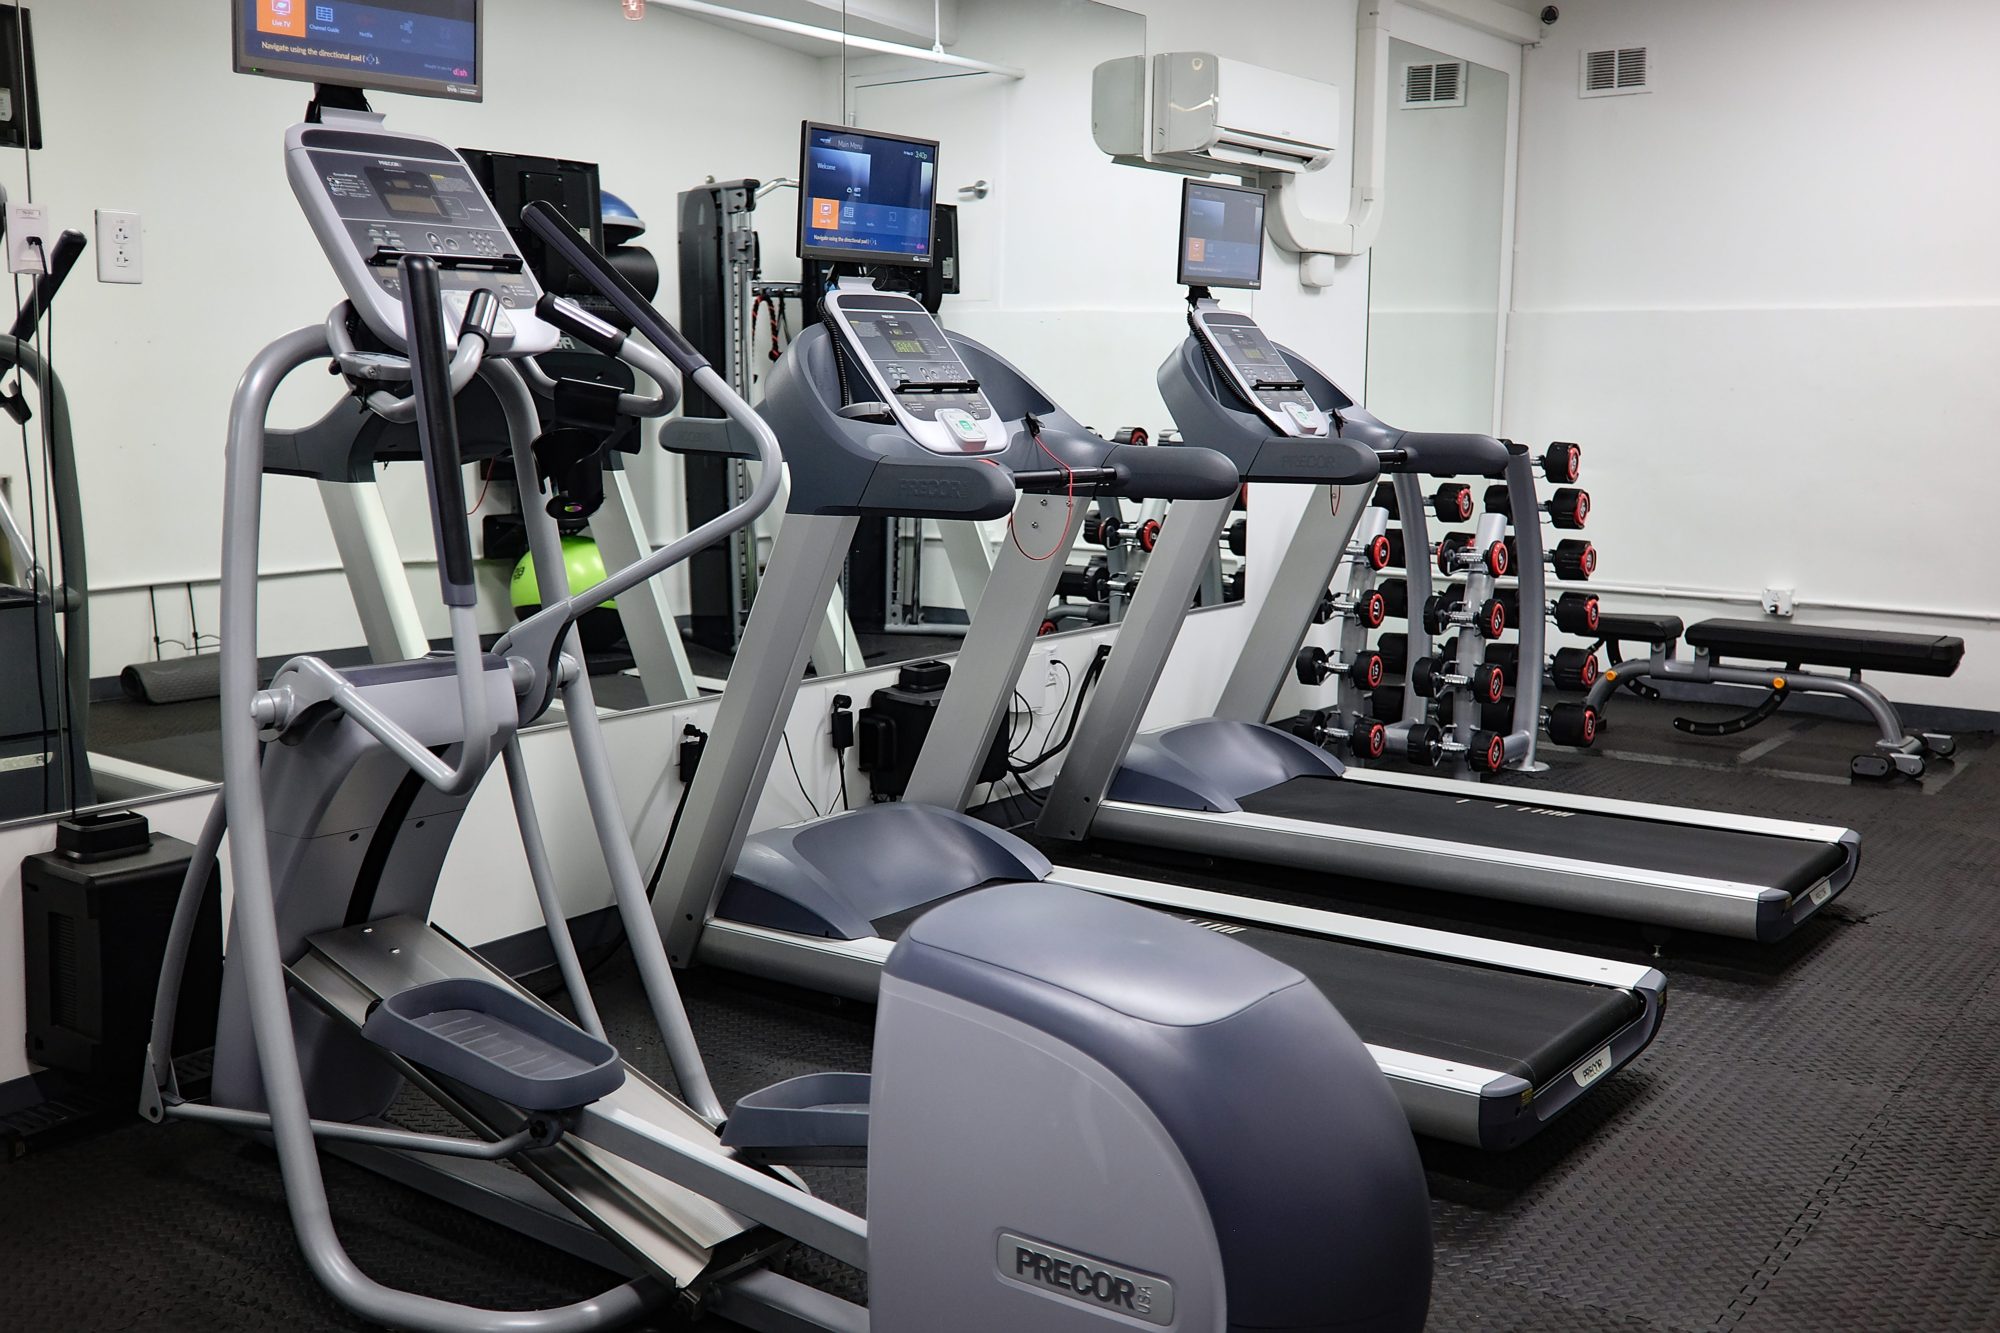 A fitness center with several exercise machines